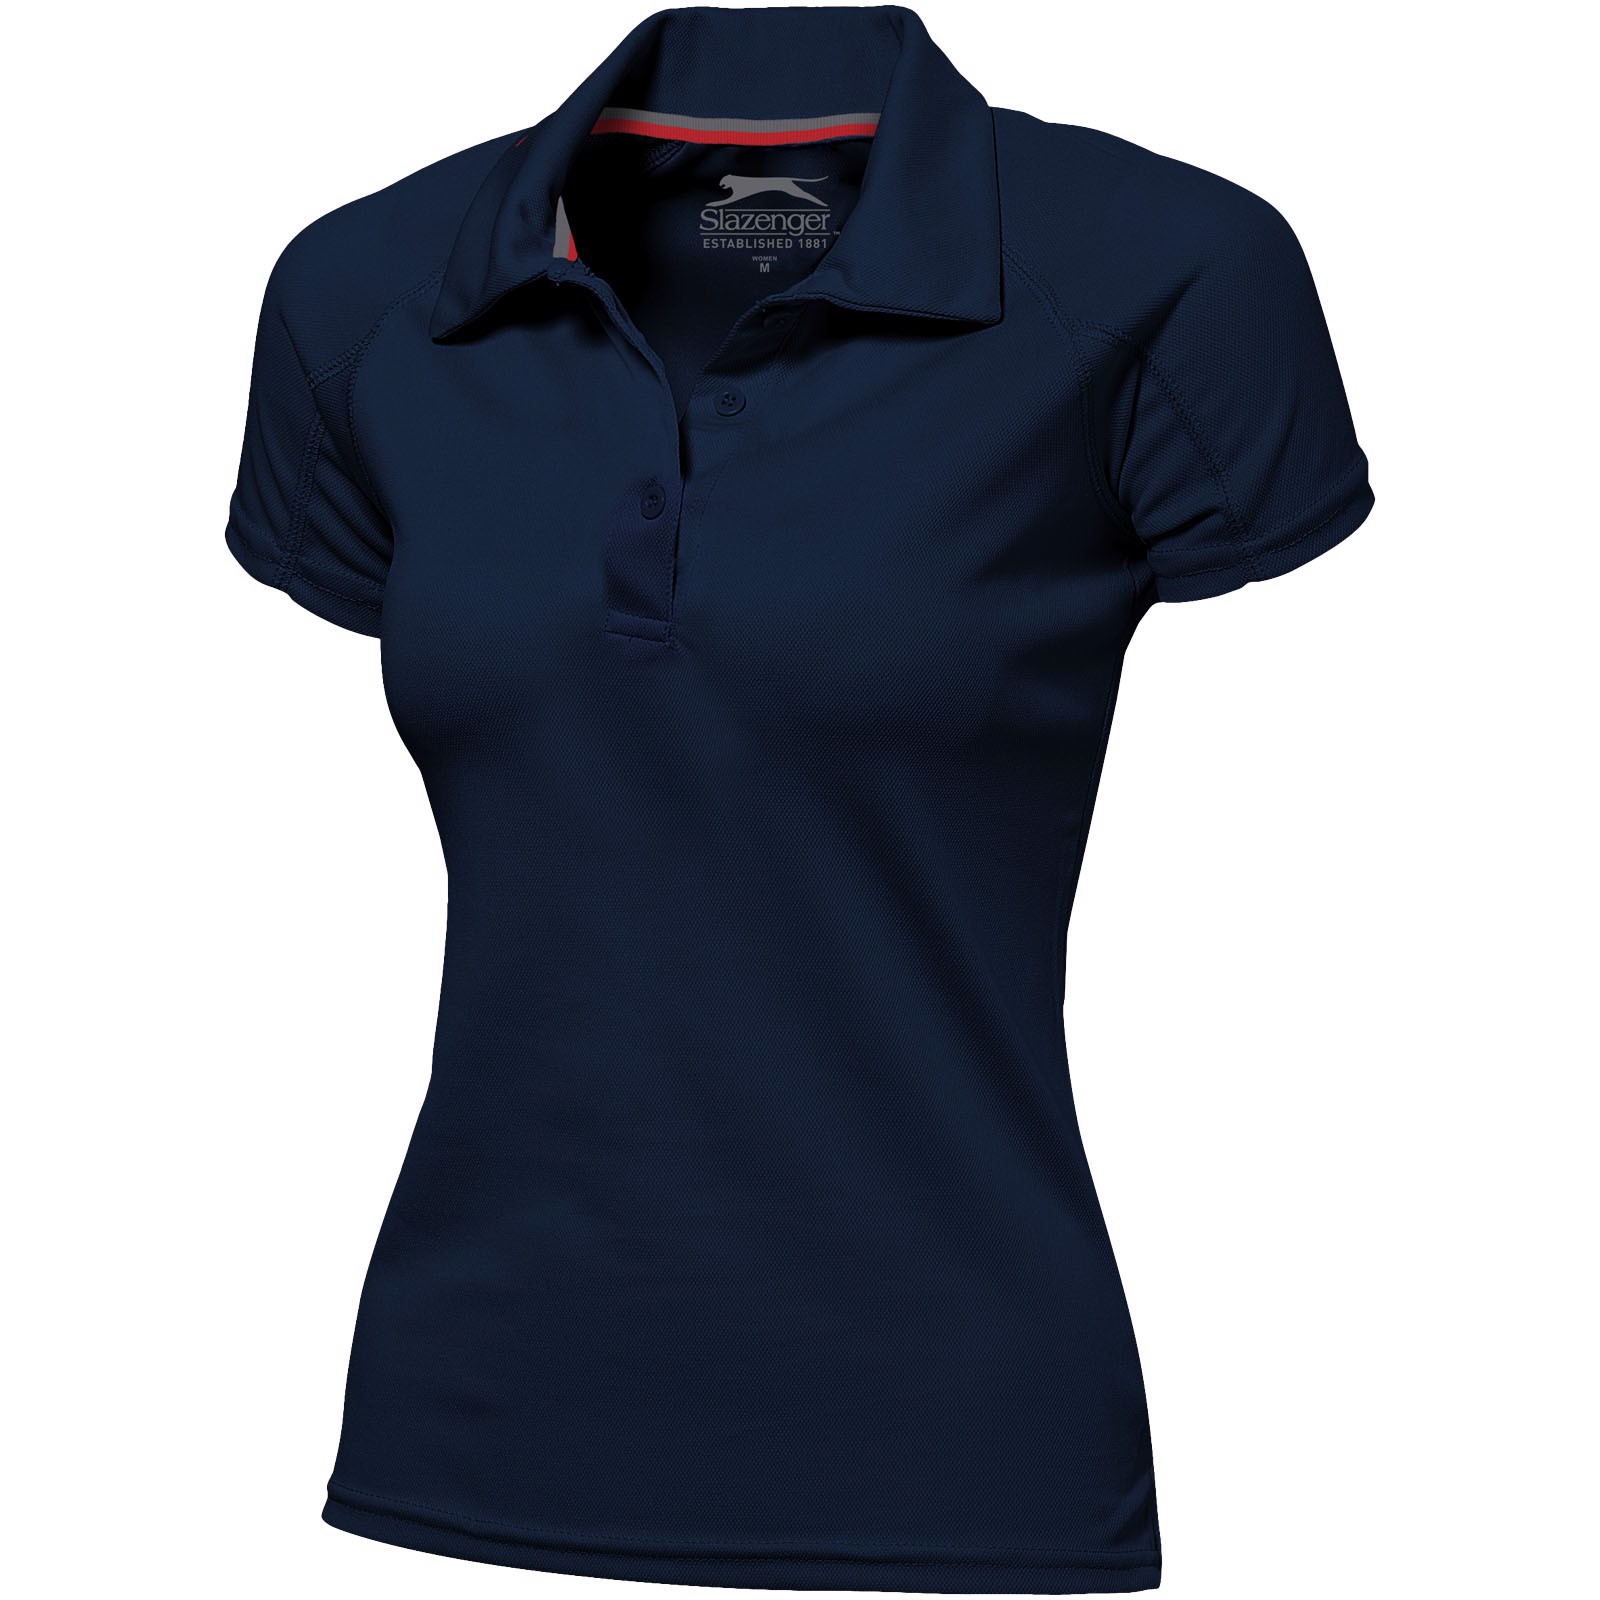 Game short sleeve women's cool fit polo - Navy / S